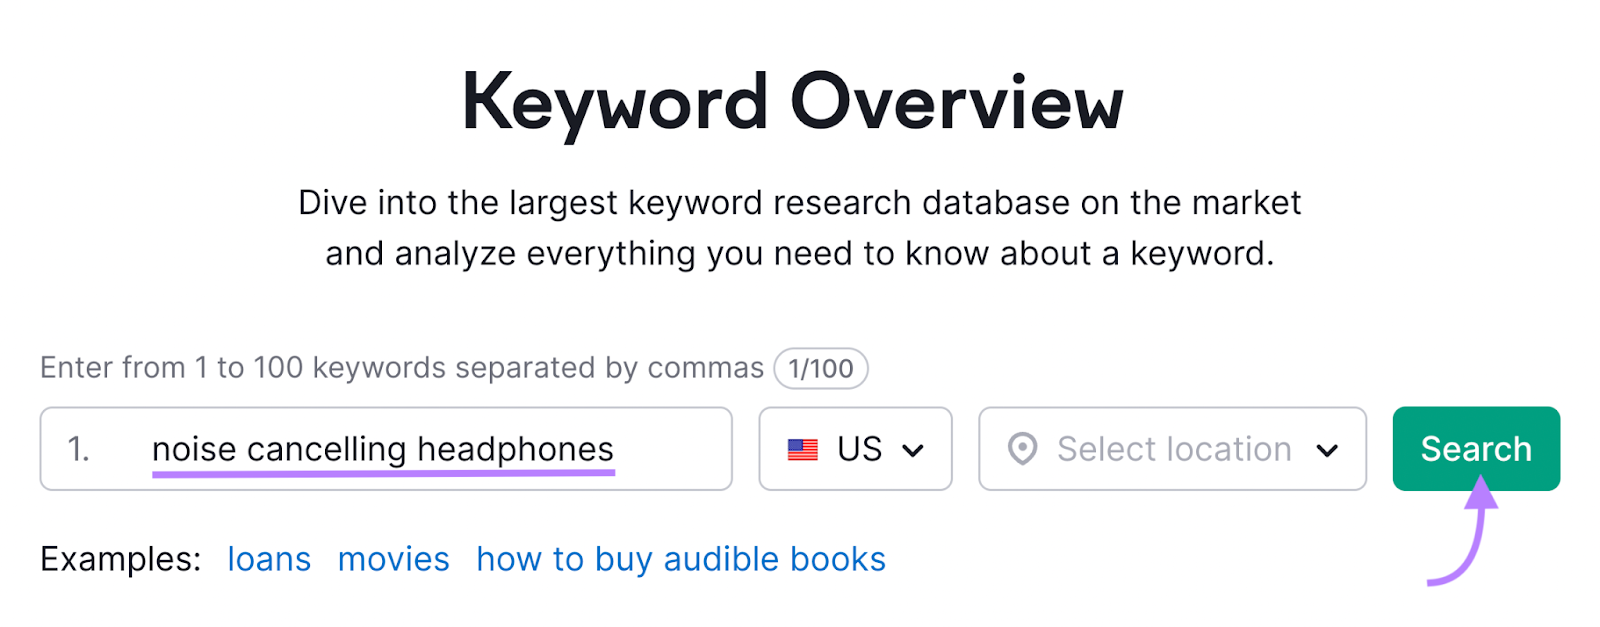 “noise-canceling headphones” entered into the Keyword Overview search bar